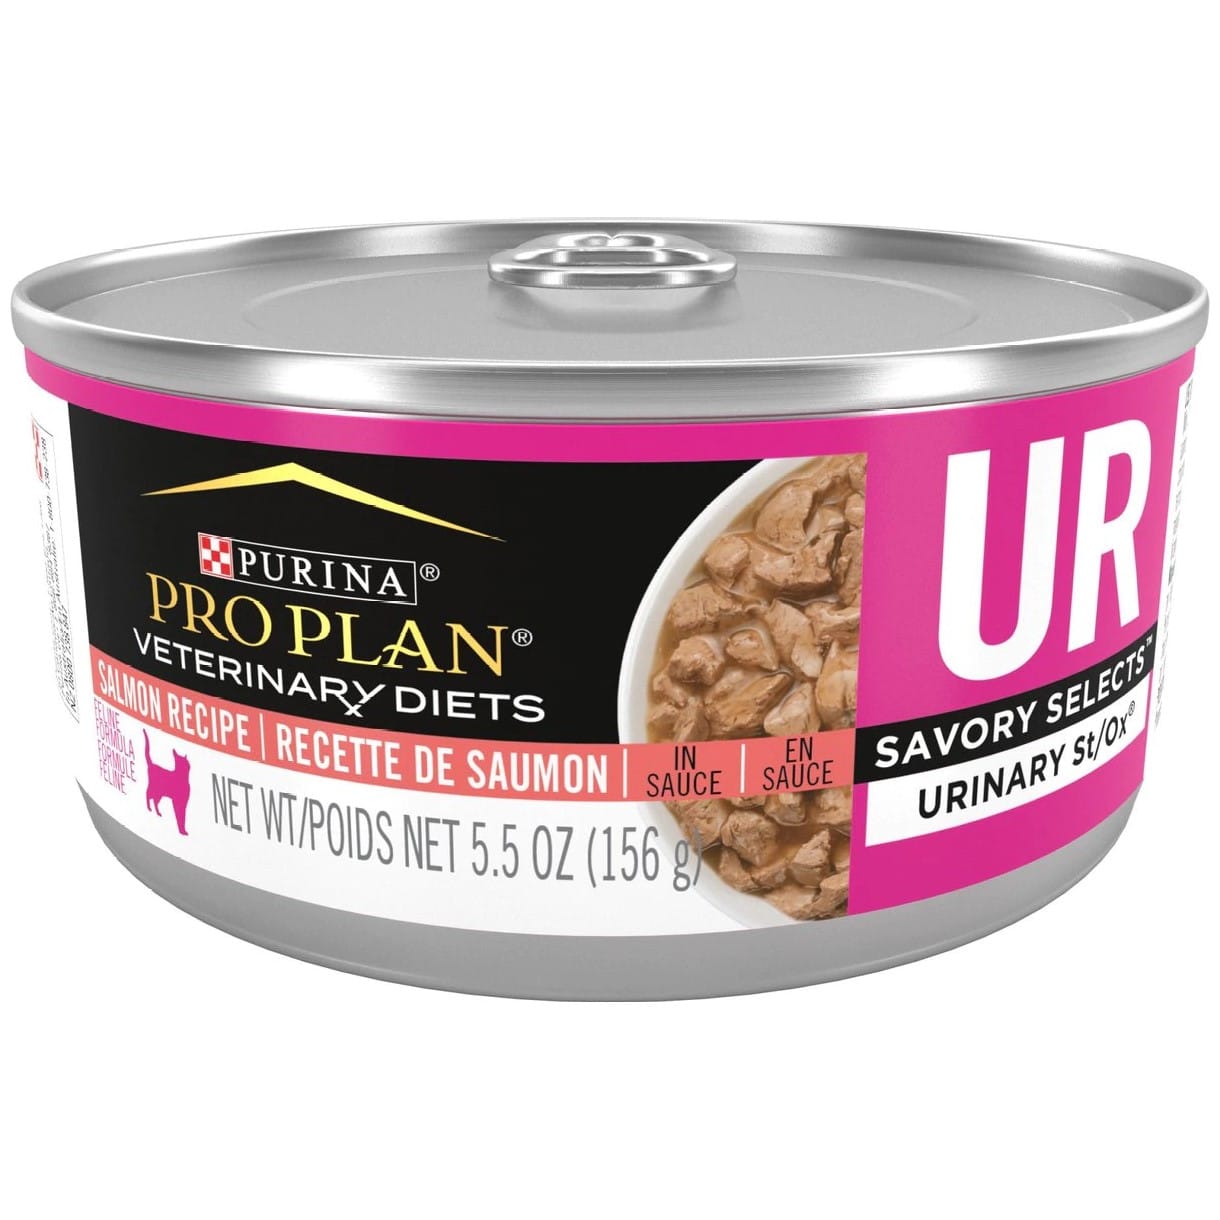 Purina Pro Plan Veterinary Diets UR Urinary St/Ox Savory Selects Salmon in Sauce Wet Cat Food